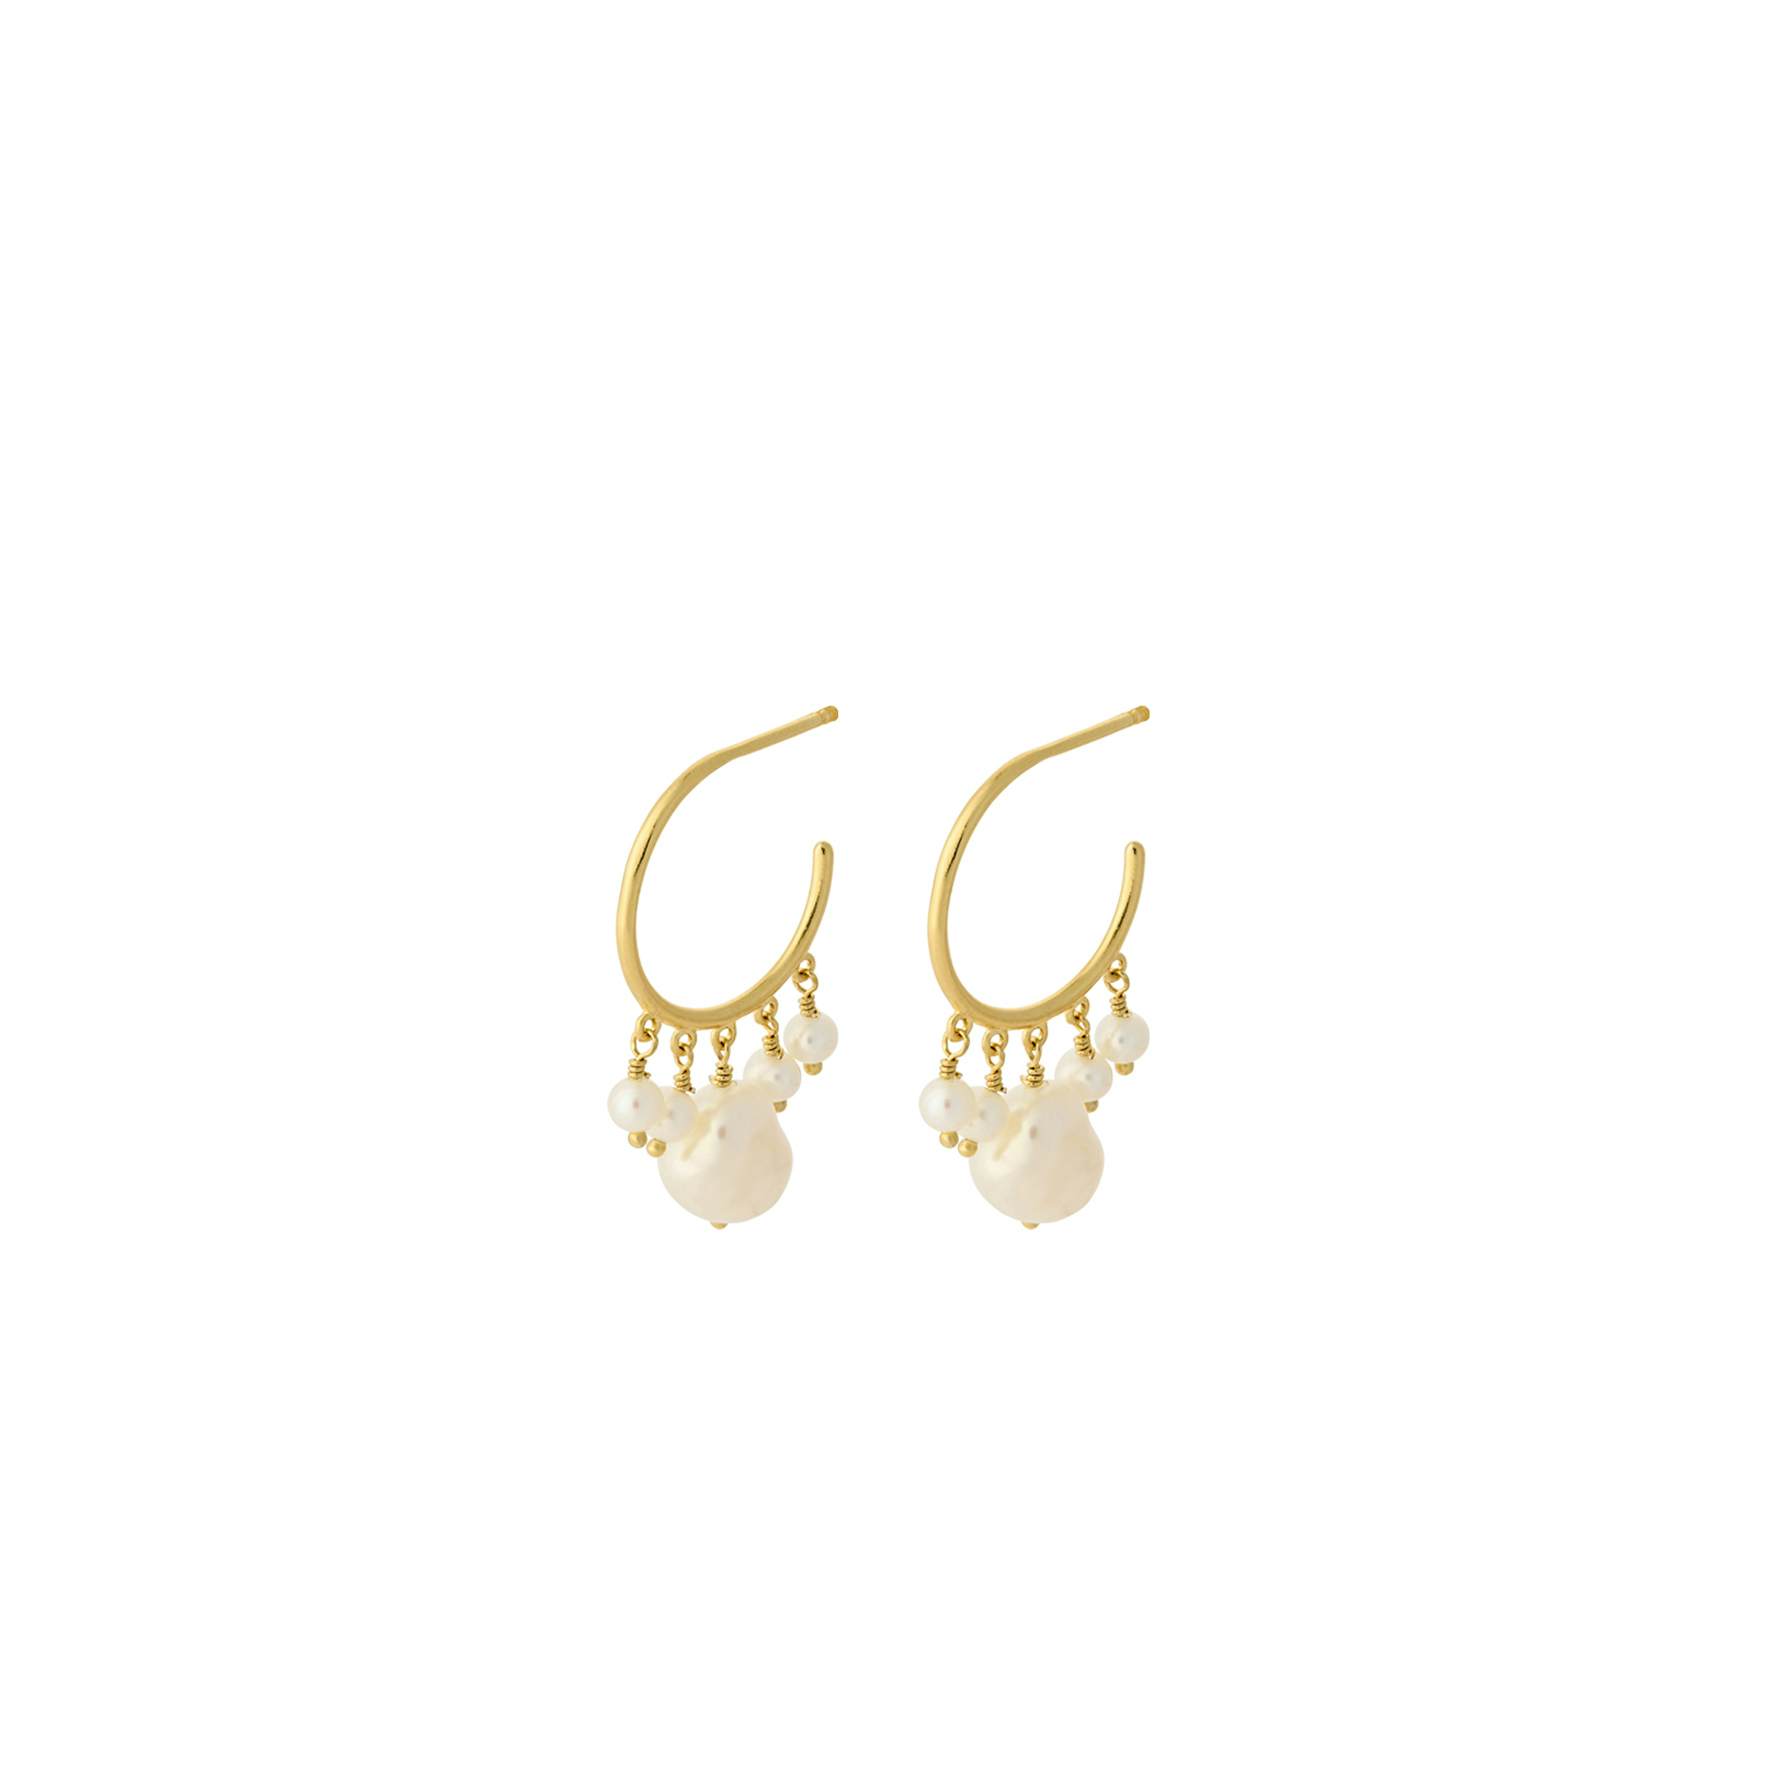 Bay Hoops from Pernille Corydon in Goldplated-Silver Sterling 925